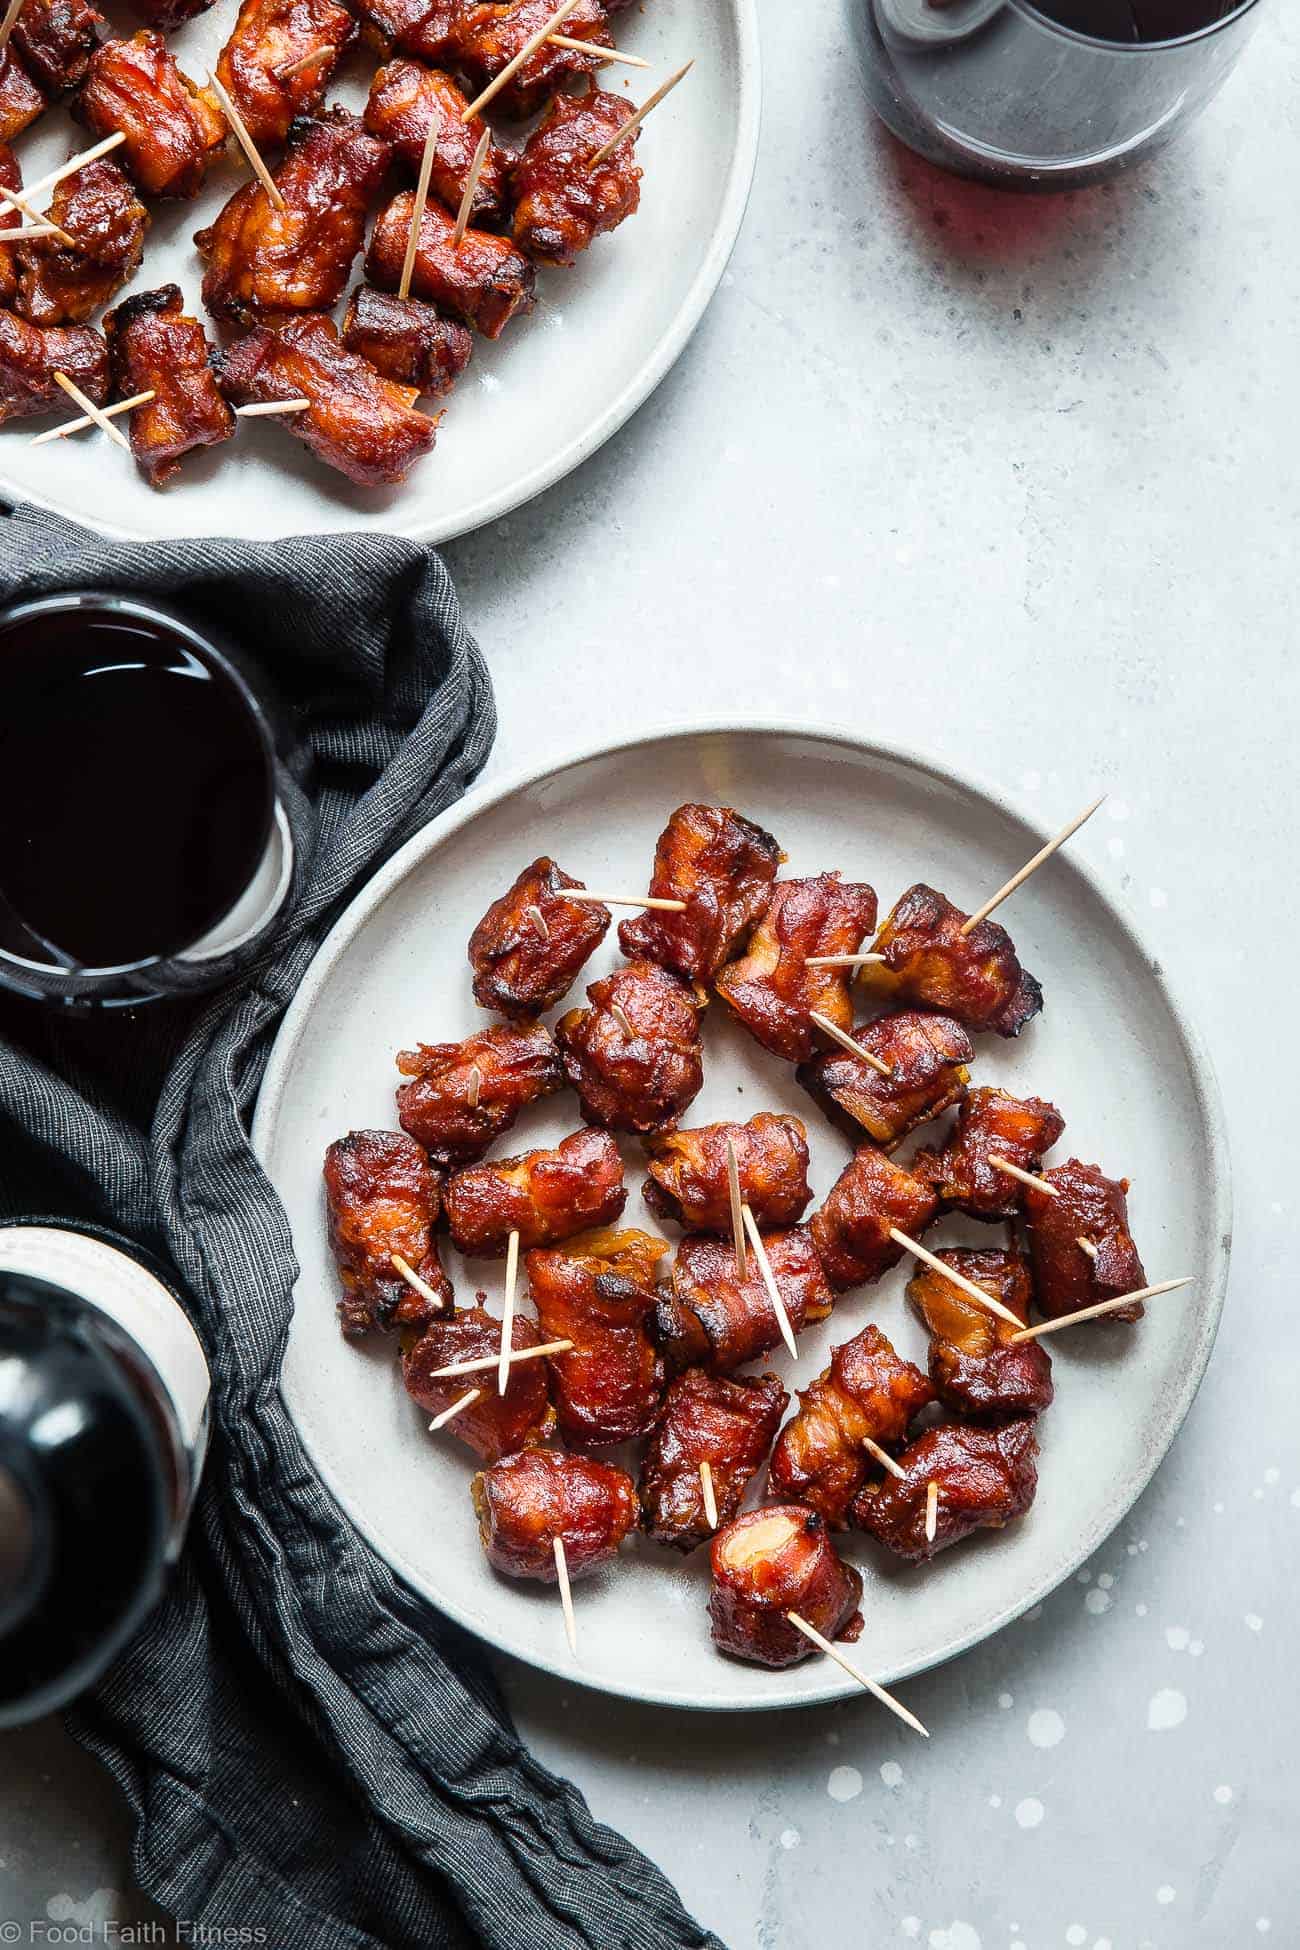 Whole30 Sweet and Sour Bacon Wrapped Pineapple Recipe - Salty, sweet and so addicting! An easy healthy and paleo friendly appetizer that you would never believe is gluten/grain/dairy/sugar free and only 35 calories a bite! | Foodfaithfitness.com | @Foodfaithfit